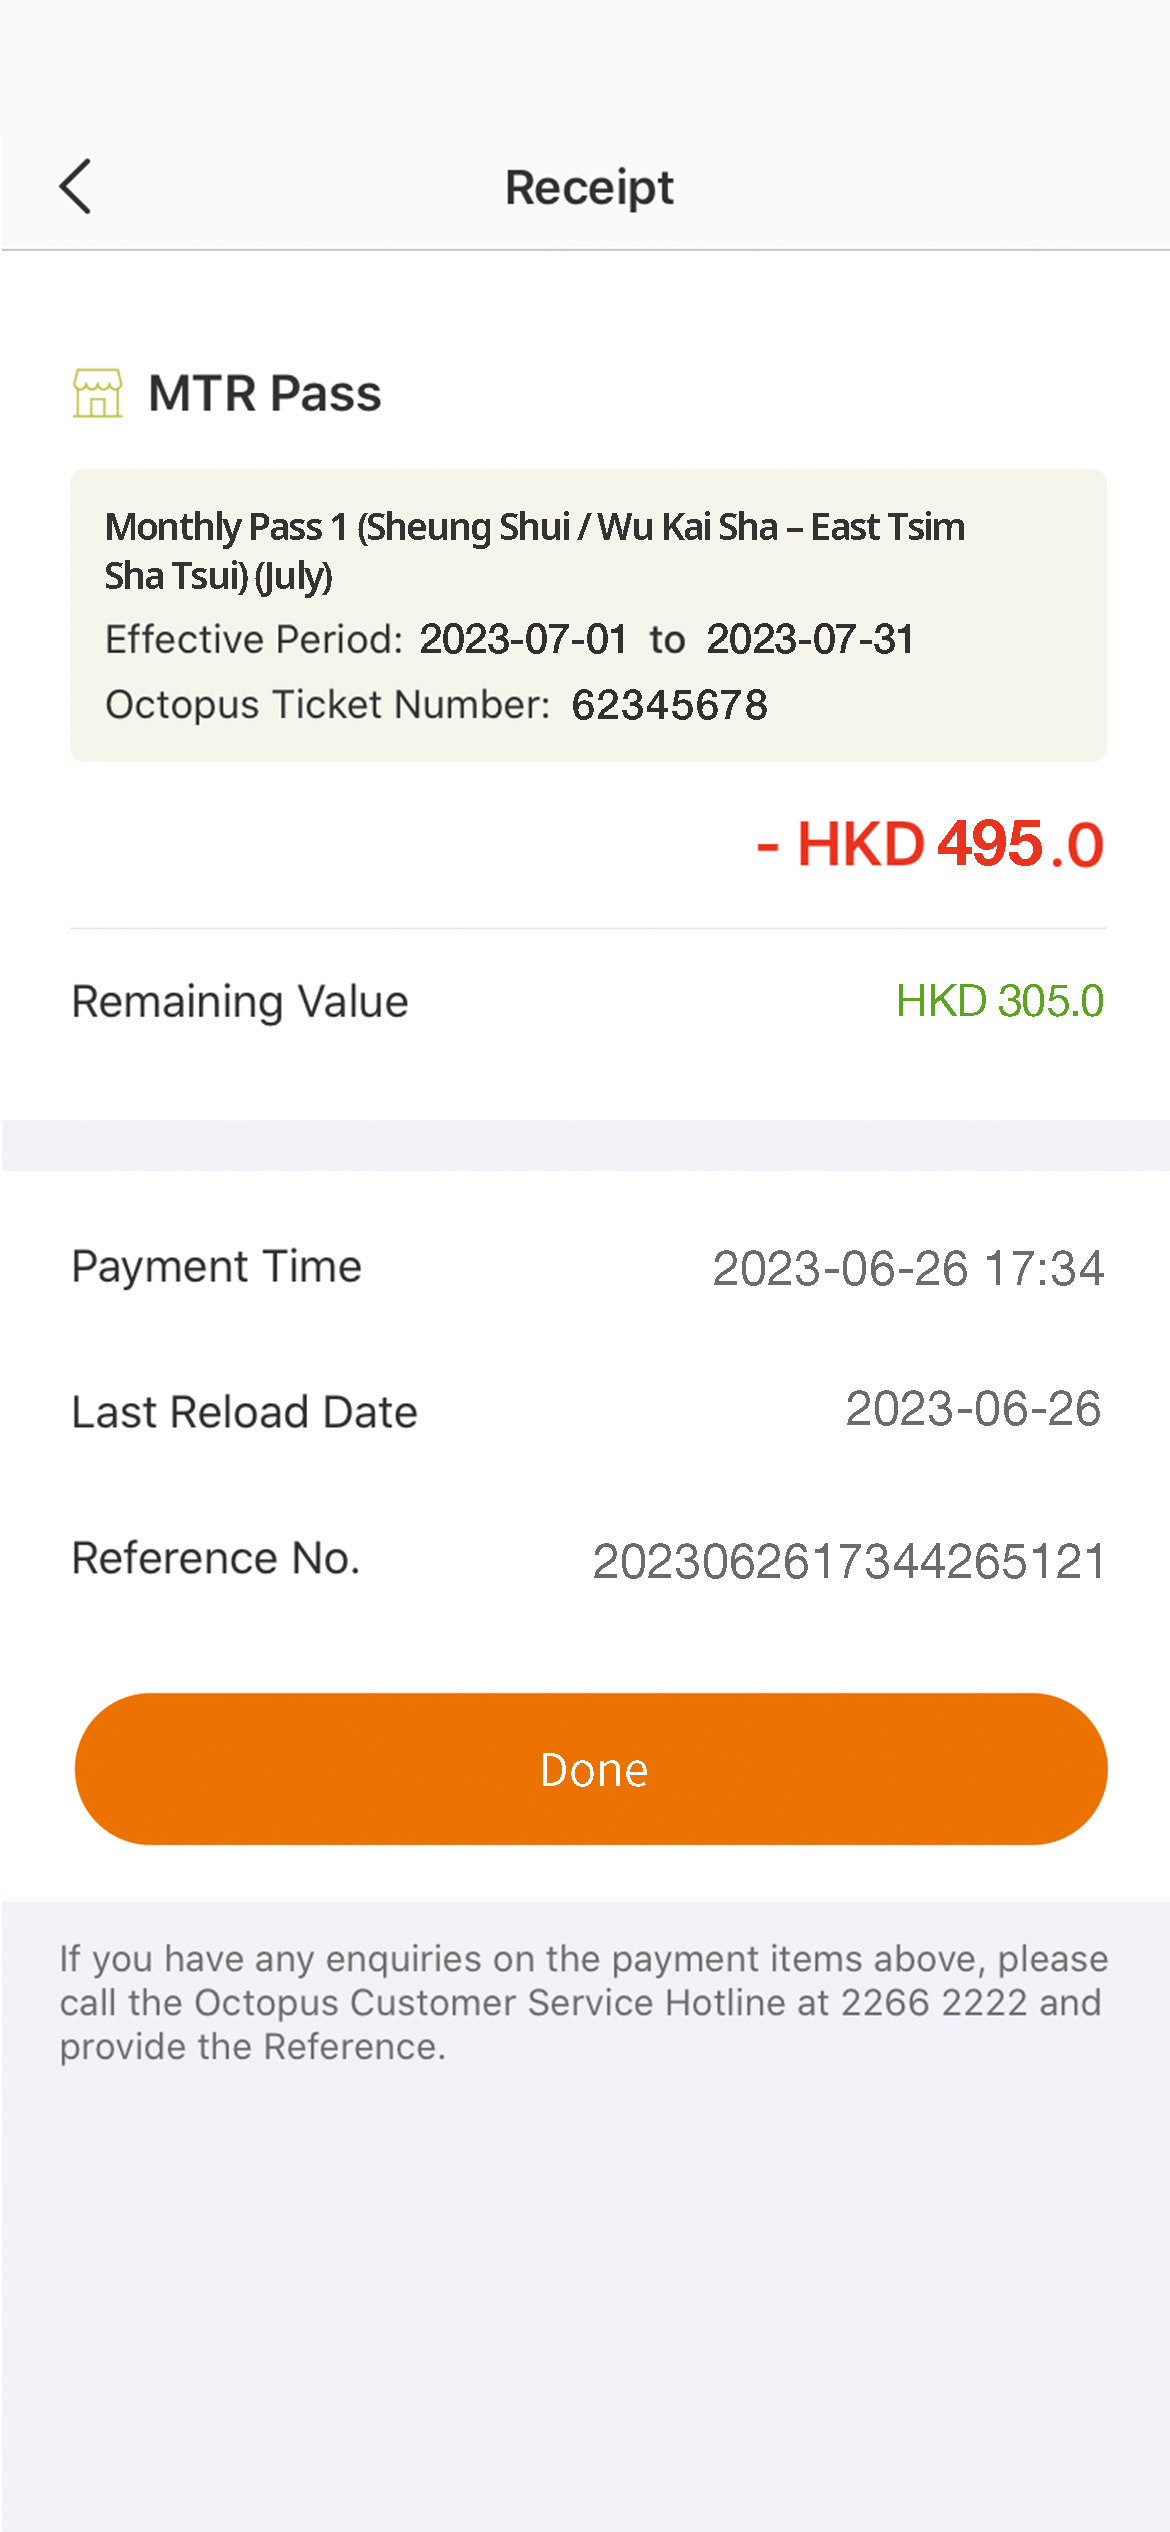 Transaction is completed and purchase record will be displayed